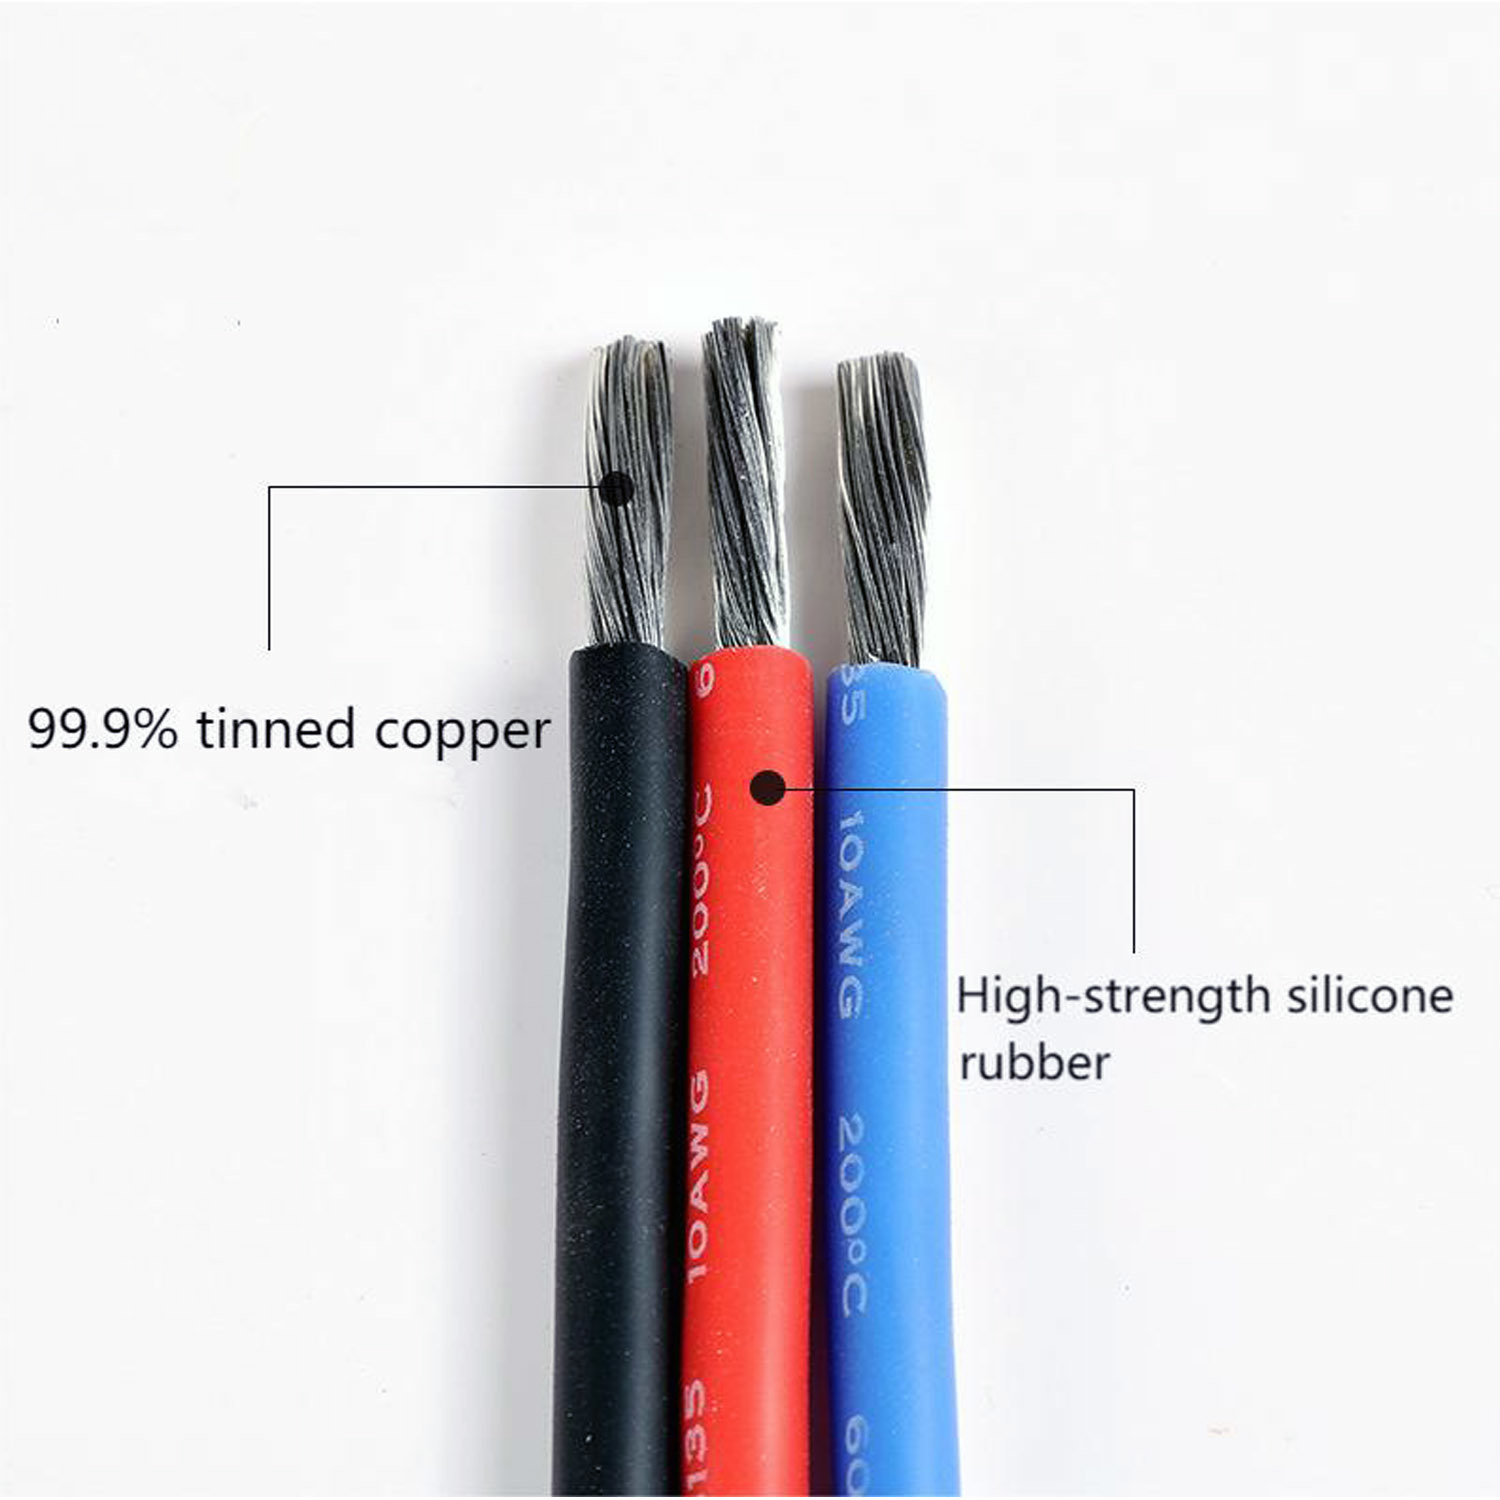 Electric Tinned Copper Silicone Fiber Glass Wire 300/500V 600V 20AWG 22AWG 23AWG Use for Air Conditioning, Oven Cable Wire